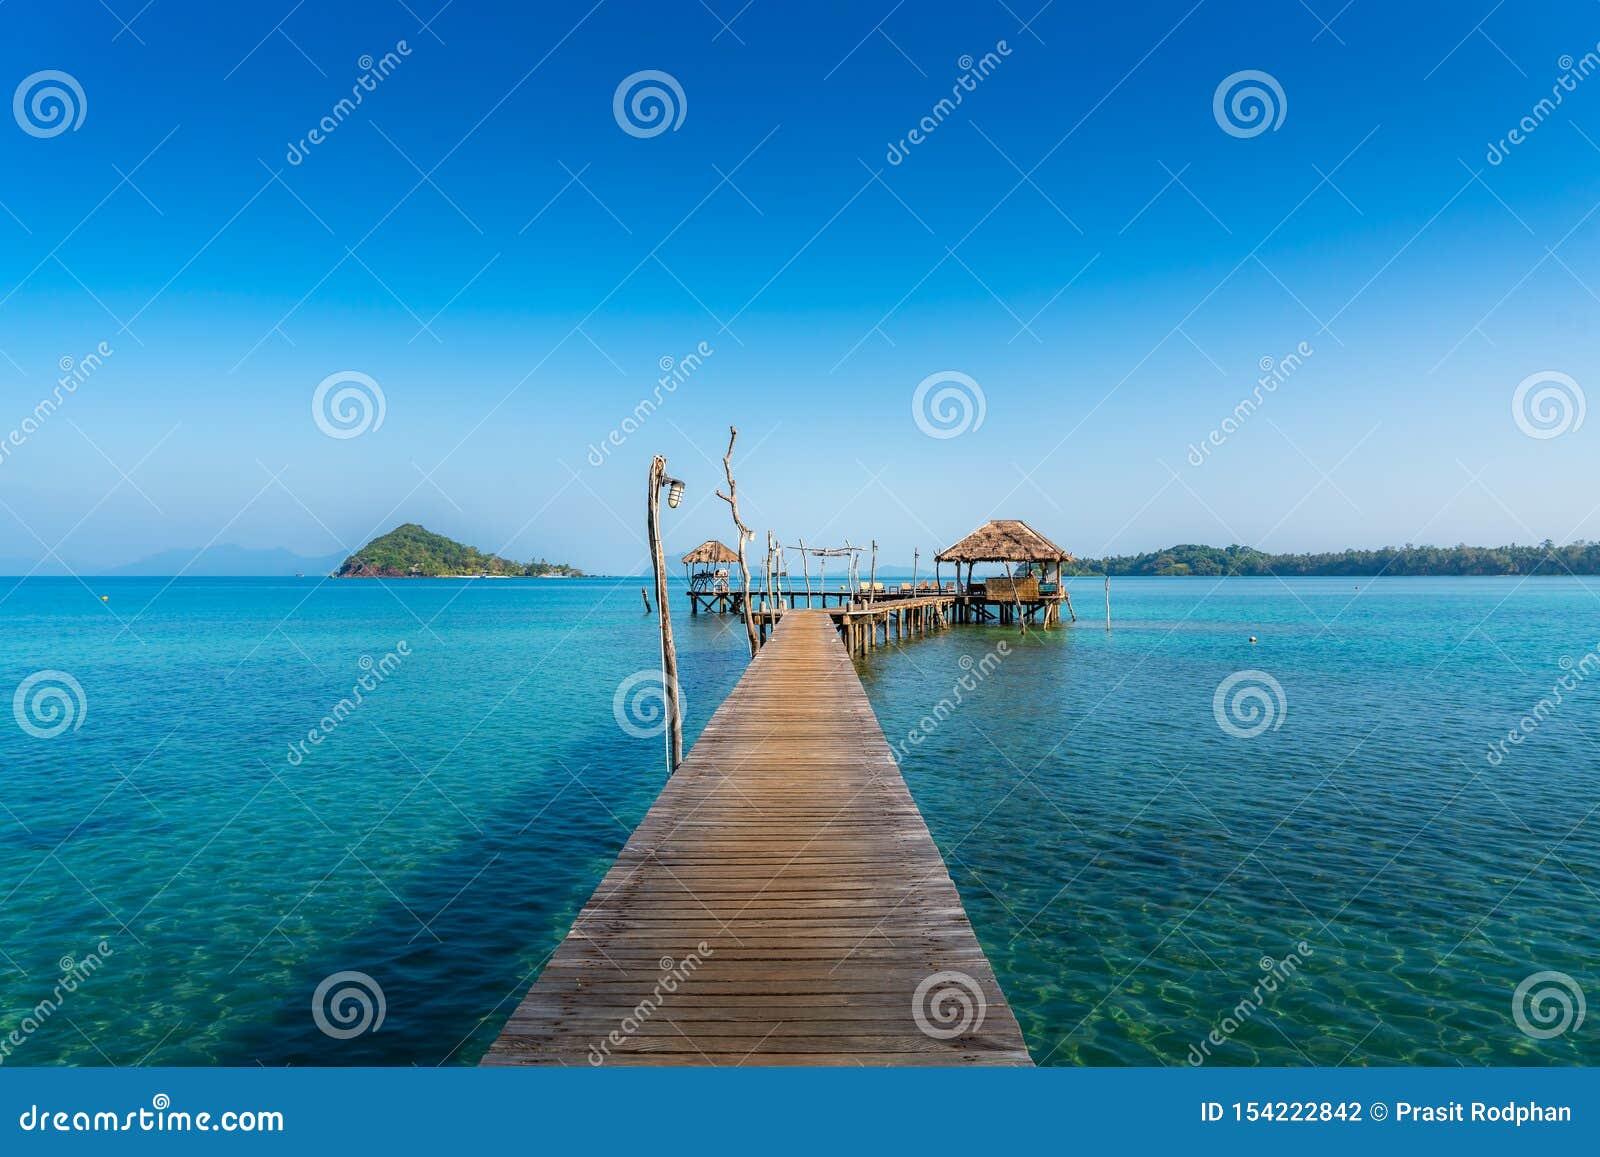 wooden bar in sea and hut with clear sky in koh mak at trat, thailand. summer, travel, vacation and holiday concept